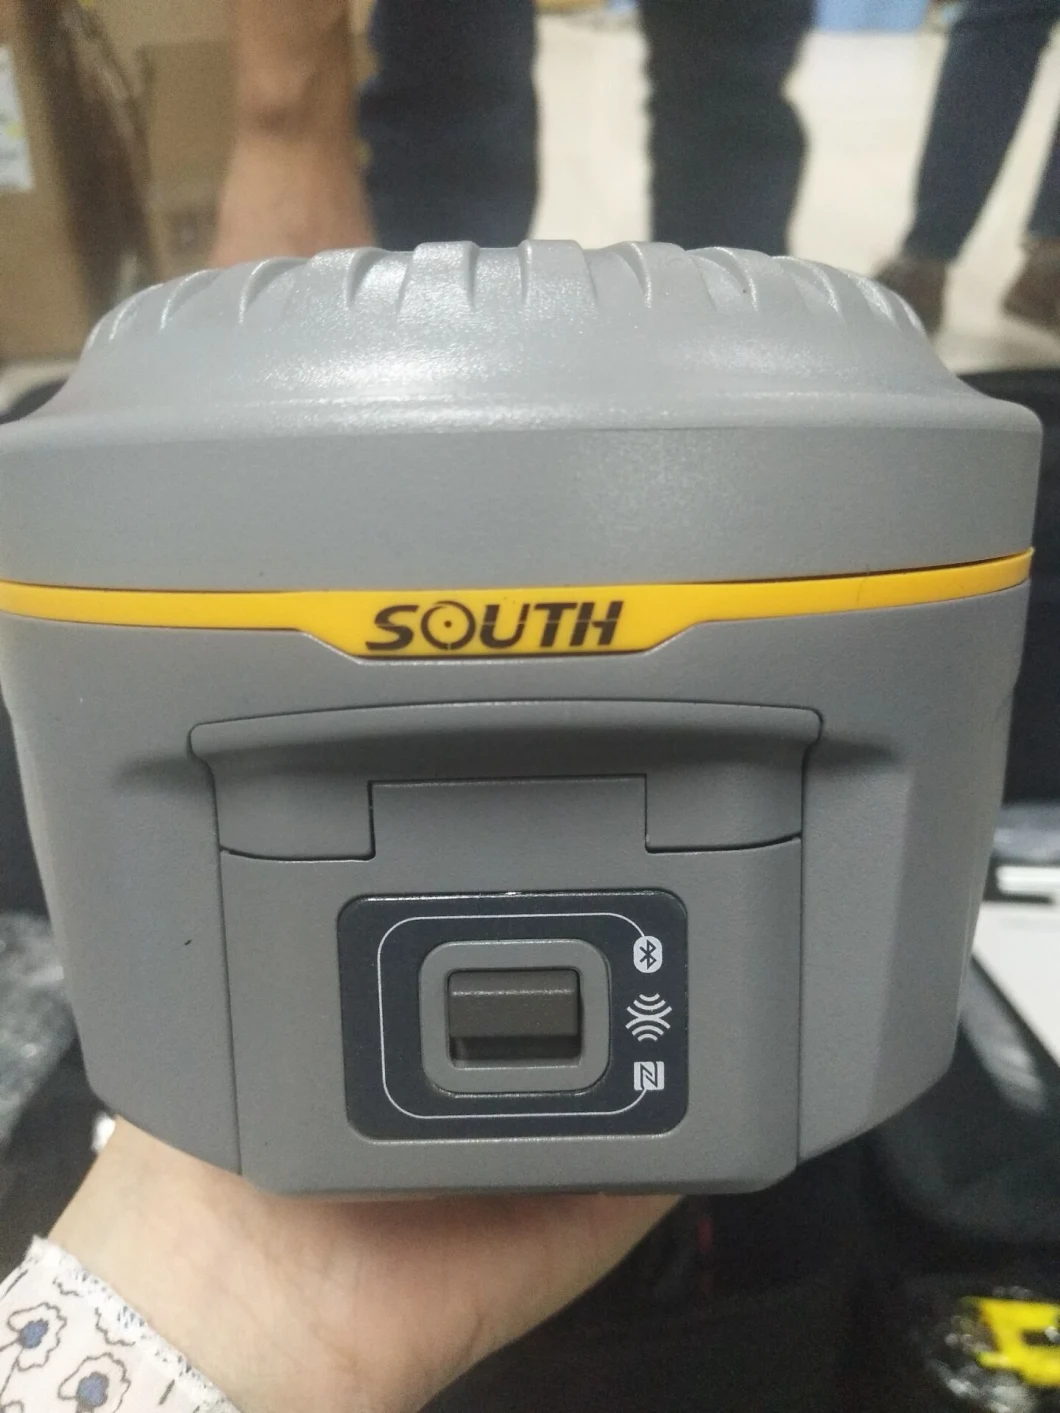 Chinese Famous Brand South GPS South Galaxy G1 Gnss Rtk Receiver